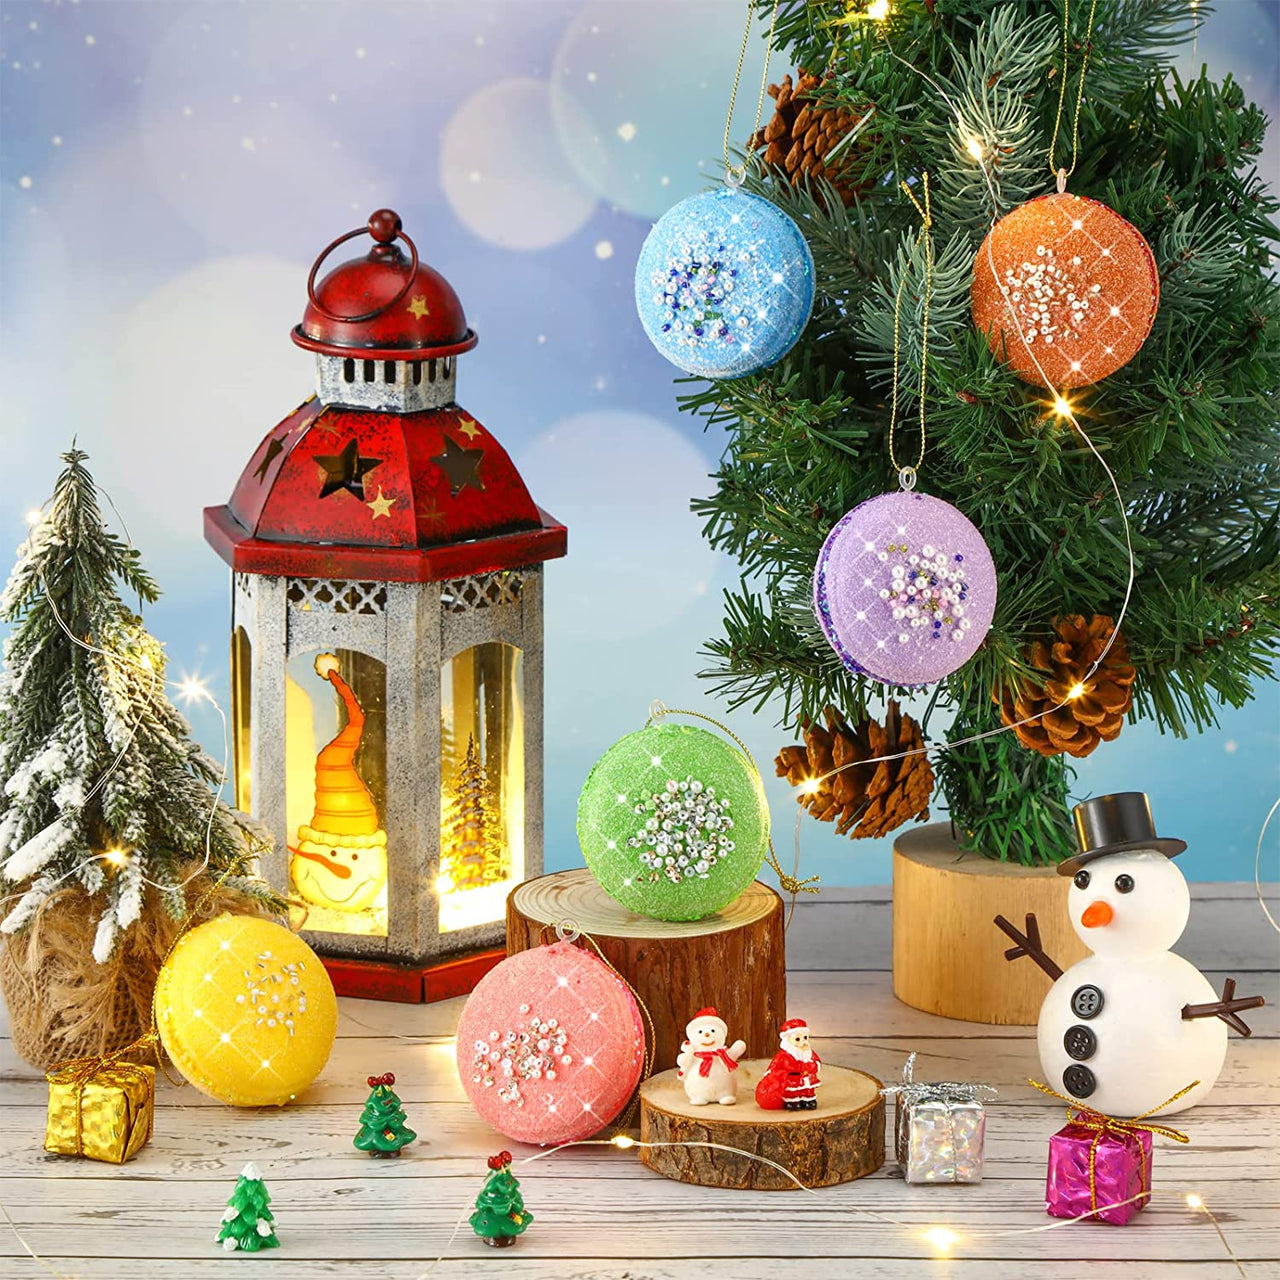 12 Pcs Christmas Tree Ornament Set 3D Glittered Macaron Ornament Colorful Candy Christmas Ornaments Pastel Macaron Decorative Hanging Ornaments with Ropes for Christmas Holiday Candy Party Decorations